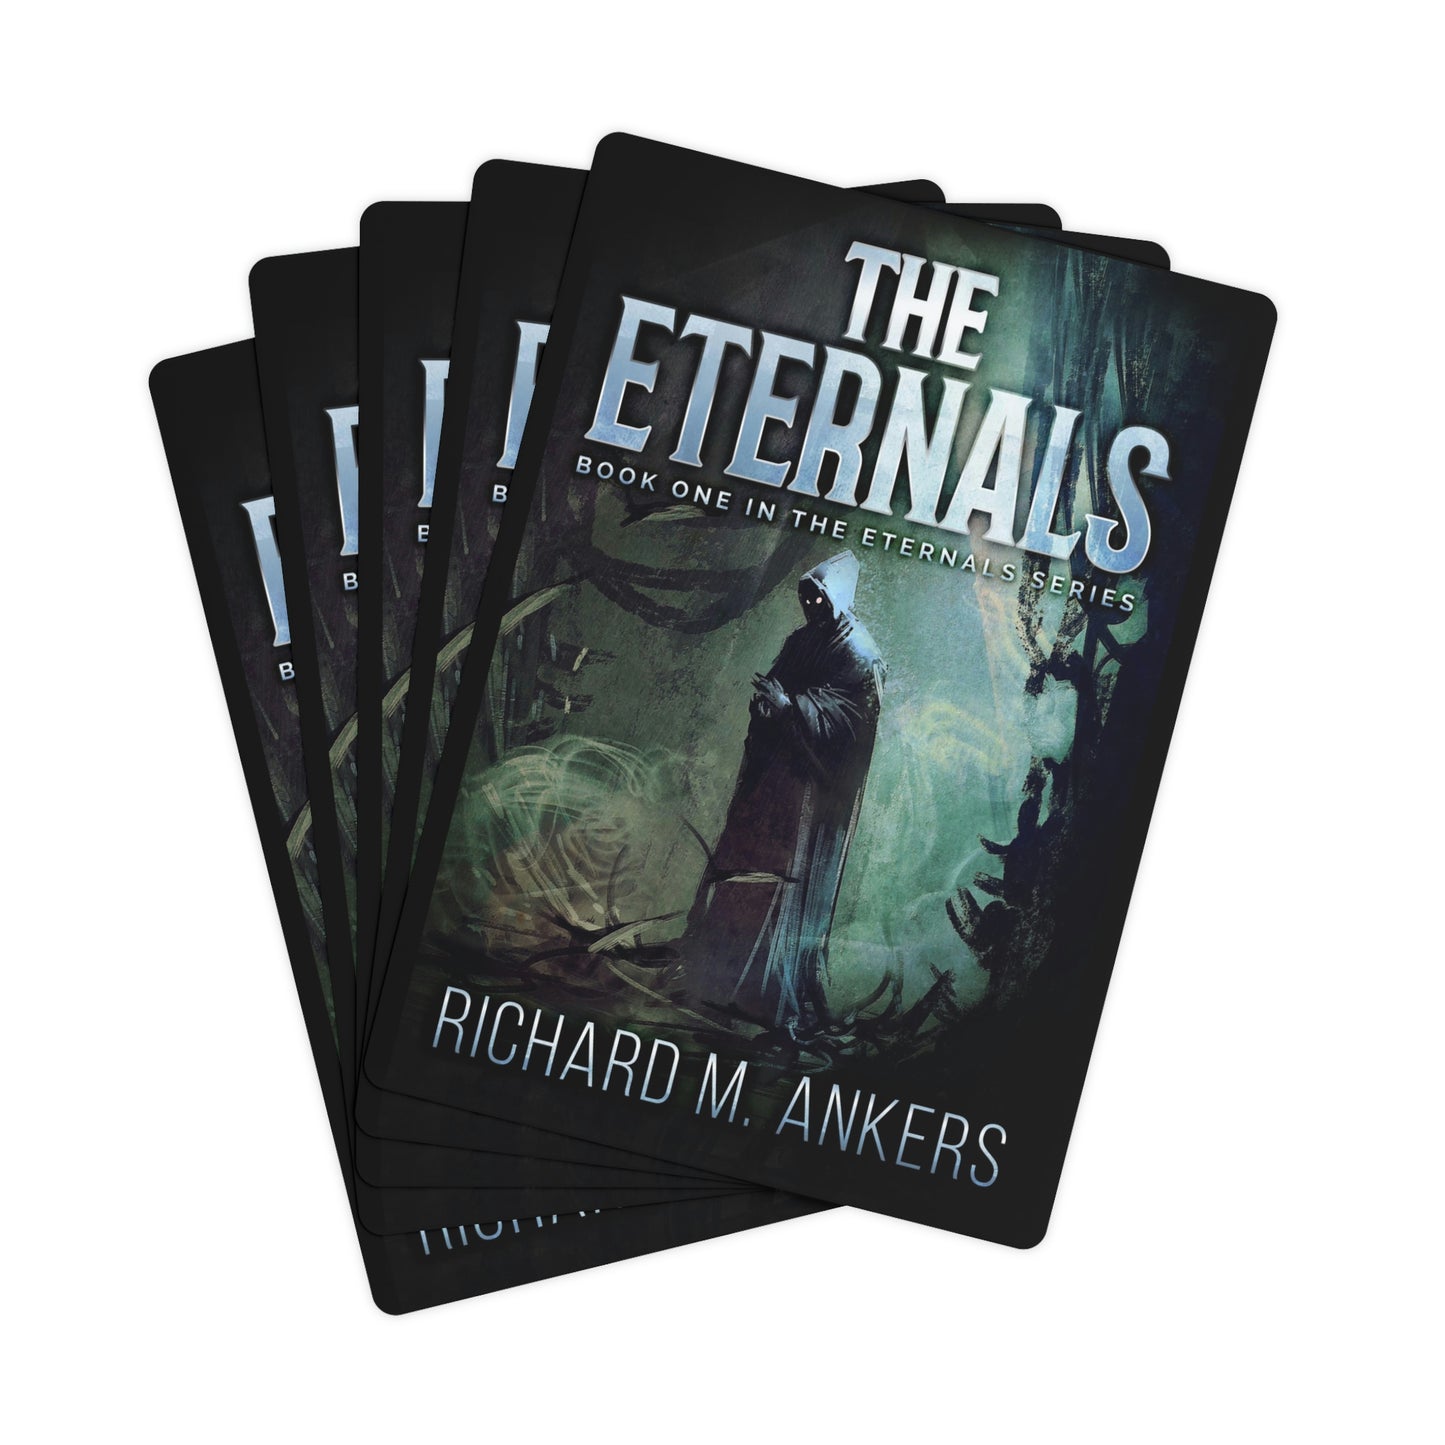 The Eternals - Playing Cards